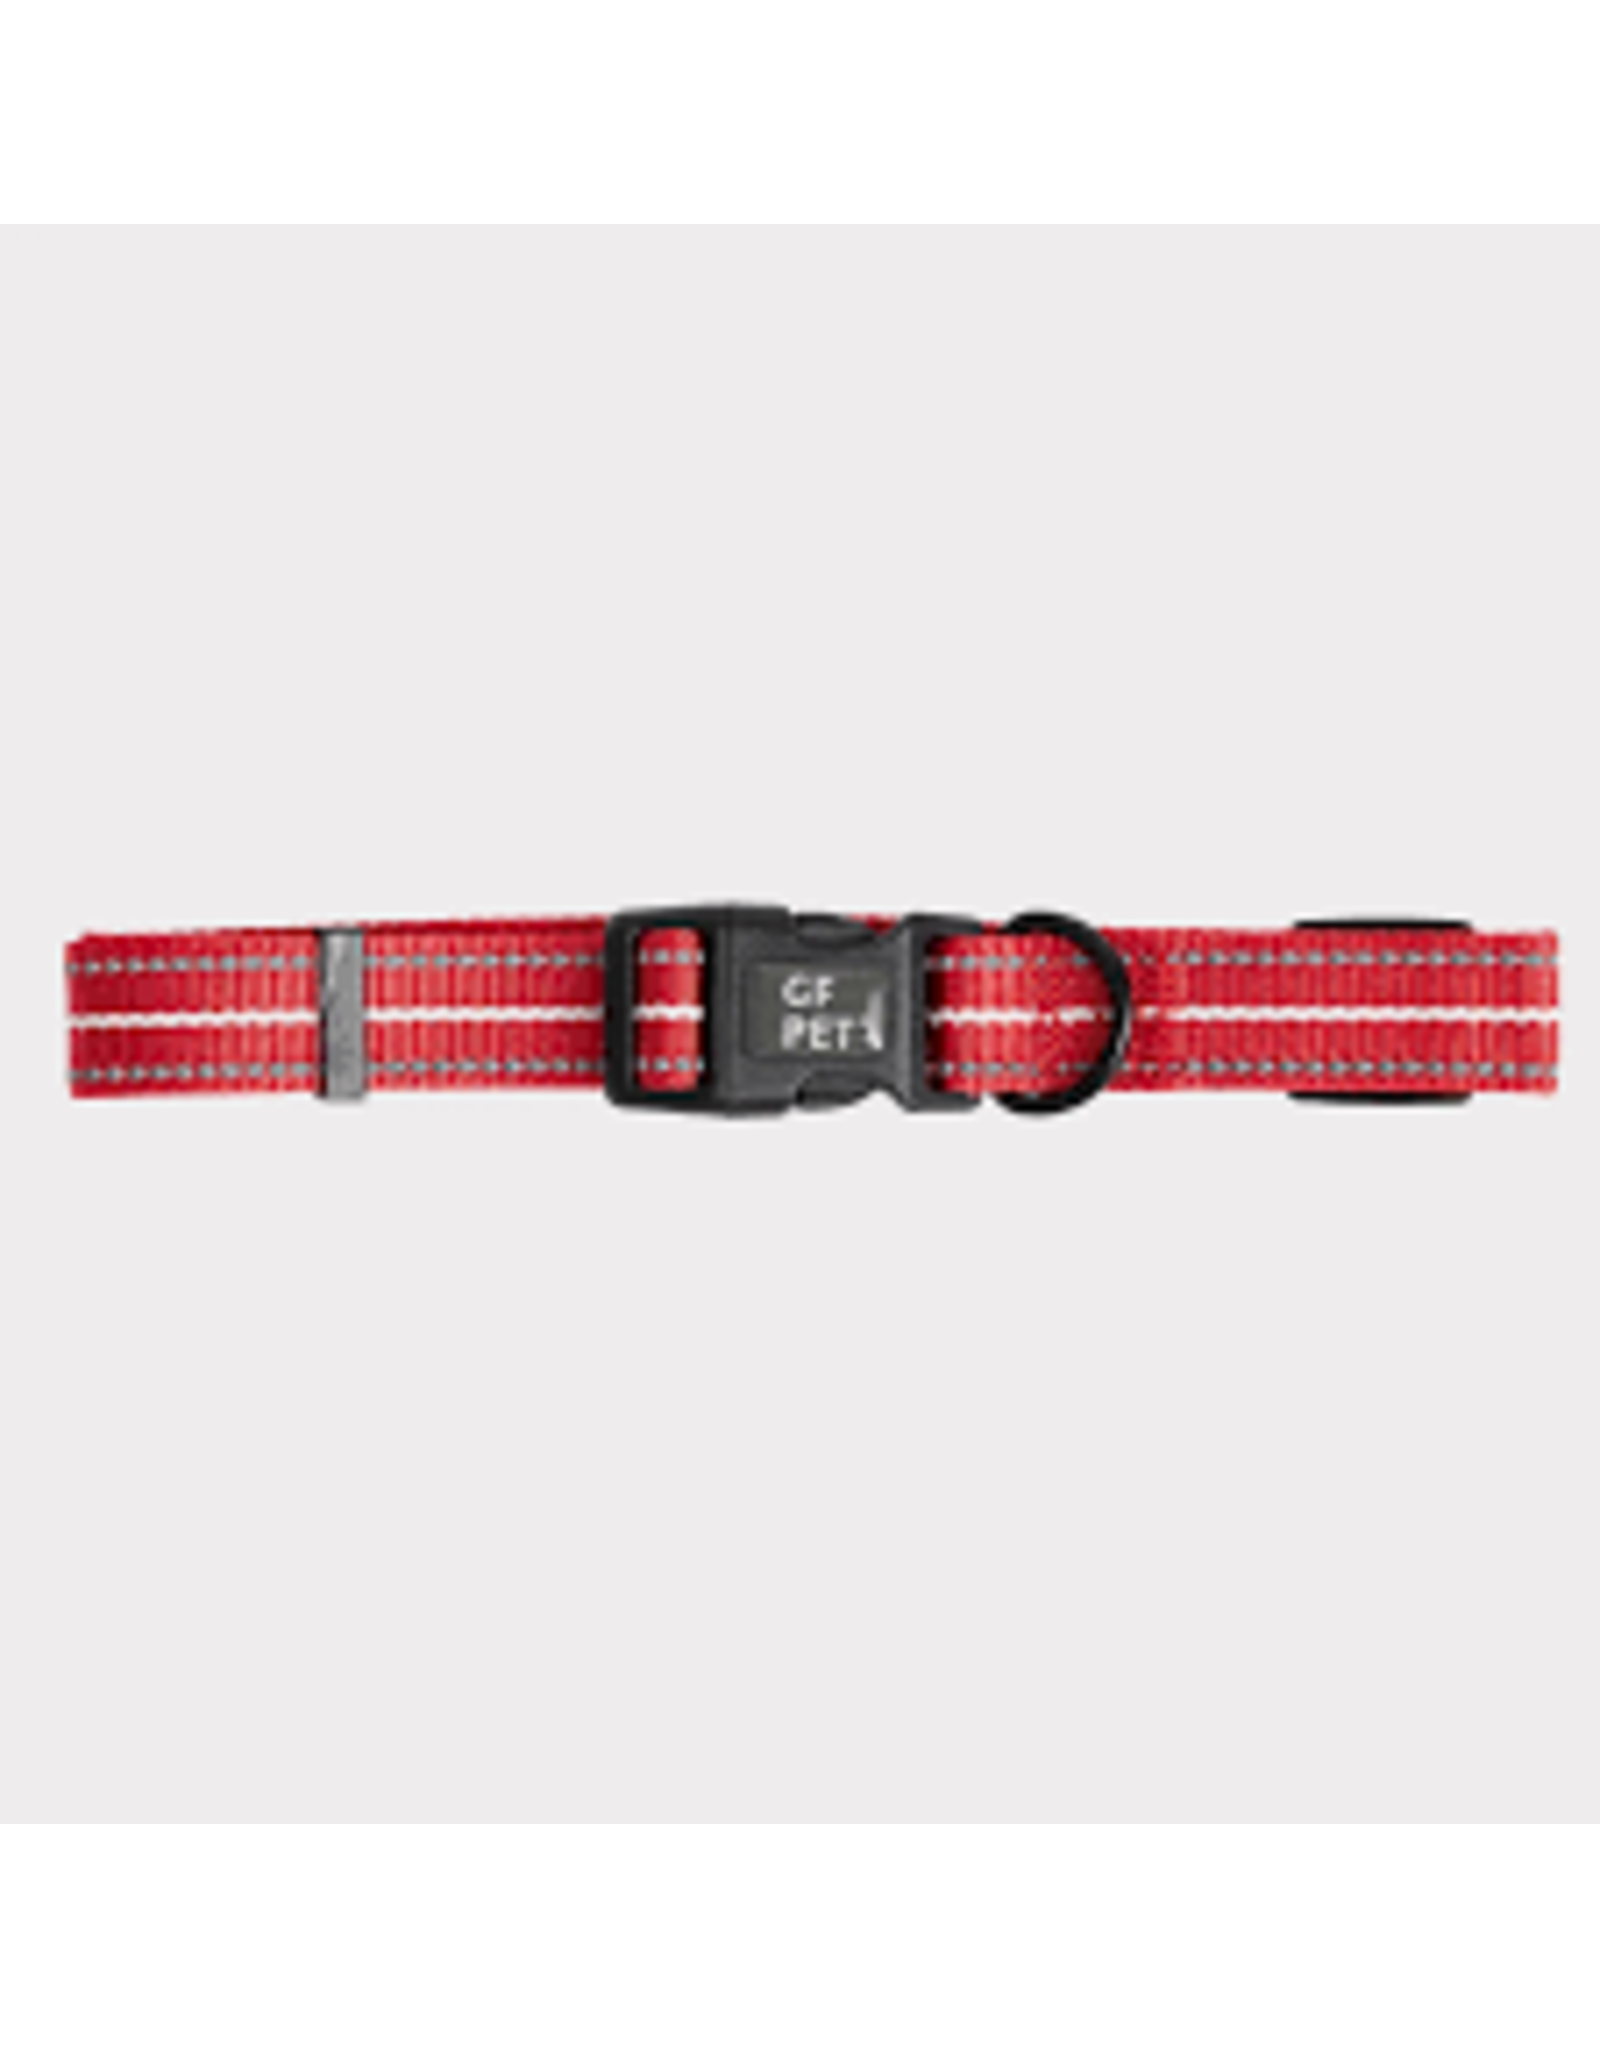 GF Reflective Collar - 1 1/2" W, 18-30" L - Red - GL434S1-RD-LW - LARGE WIDE